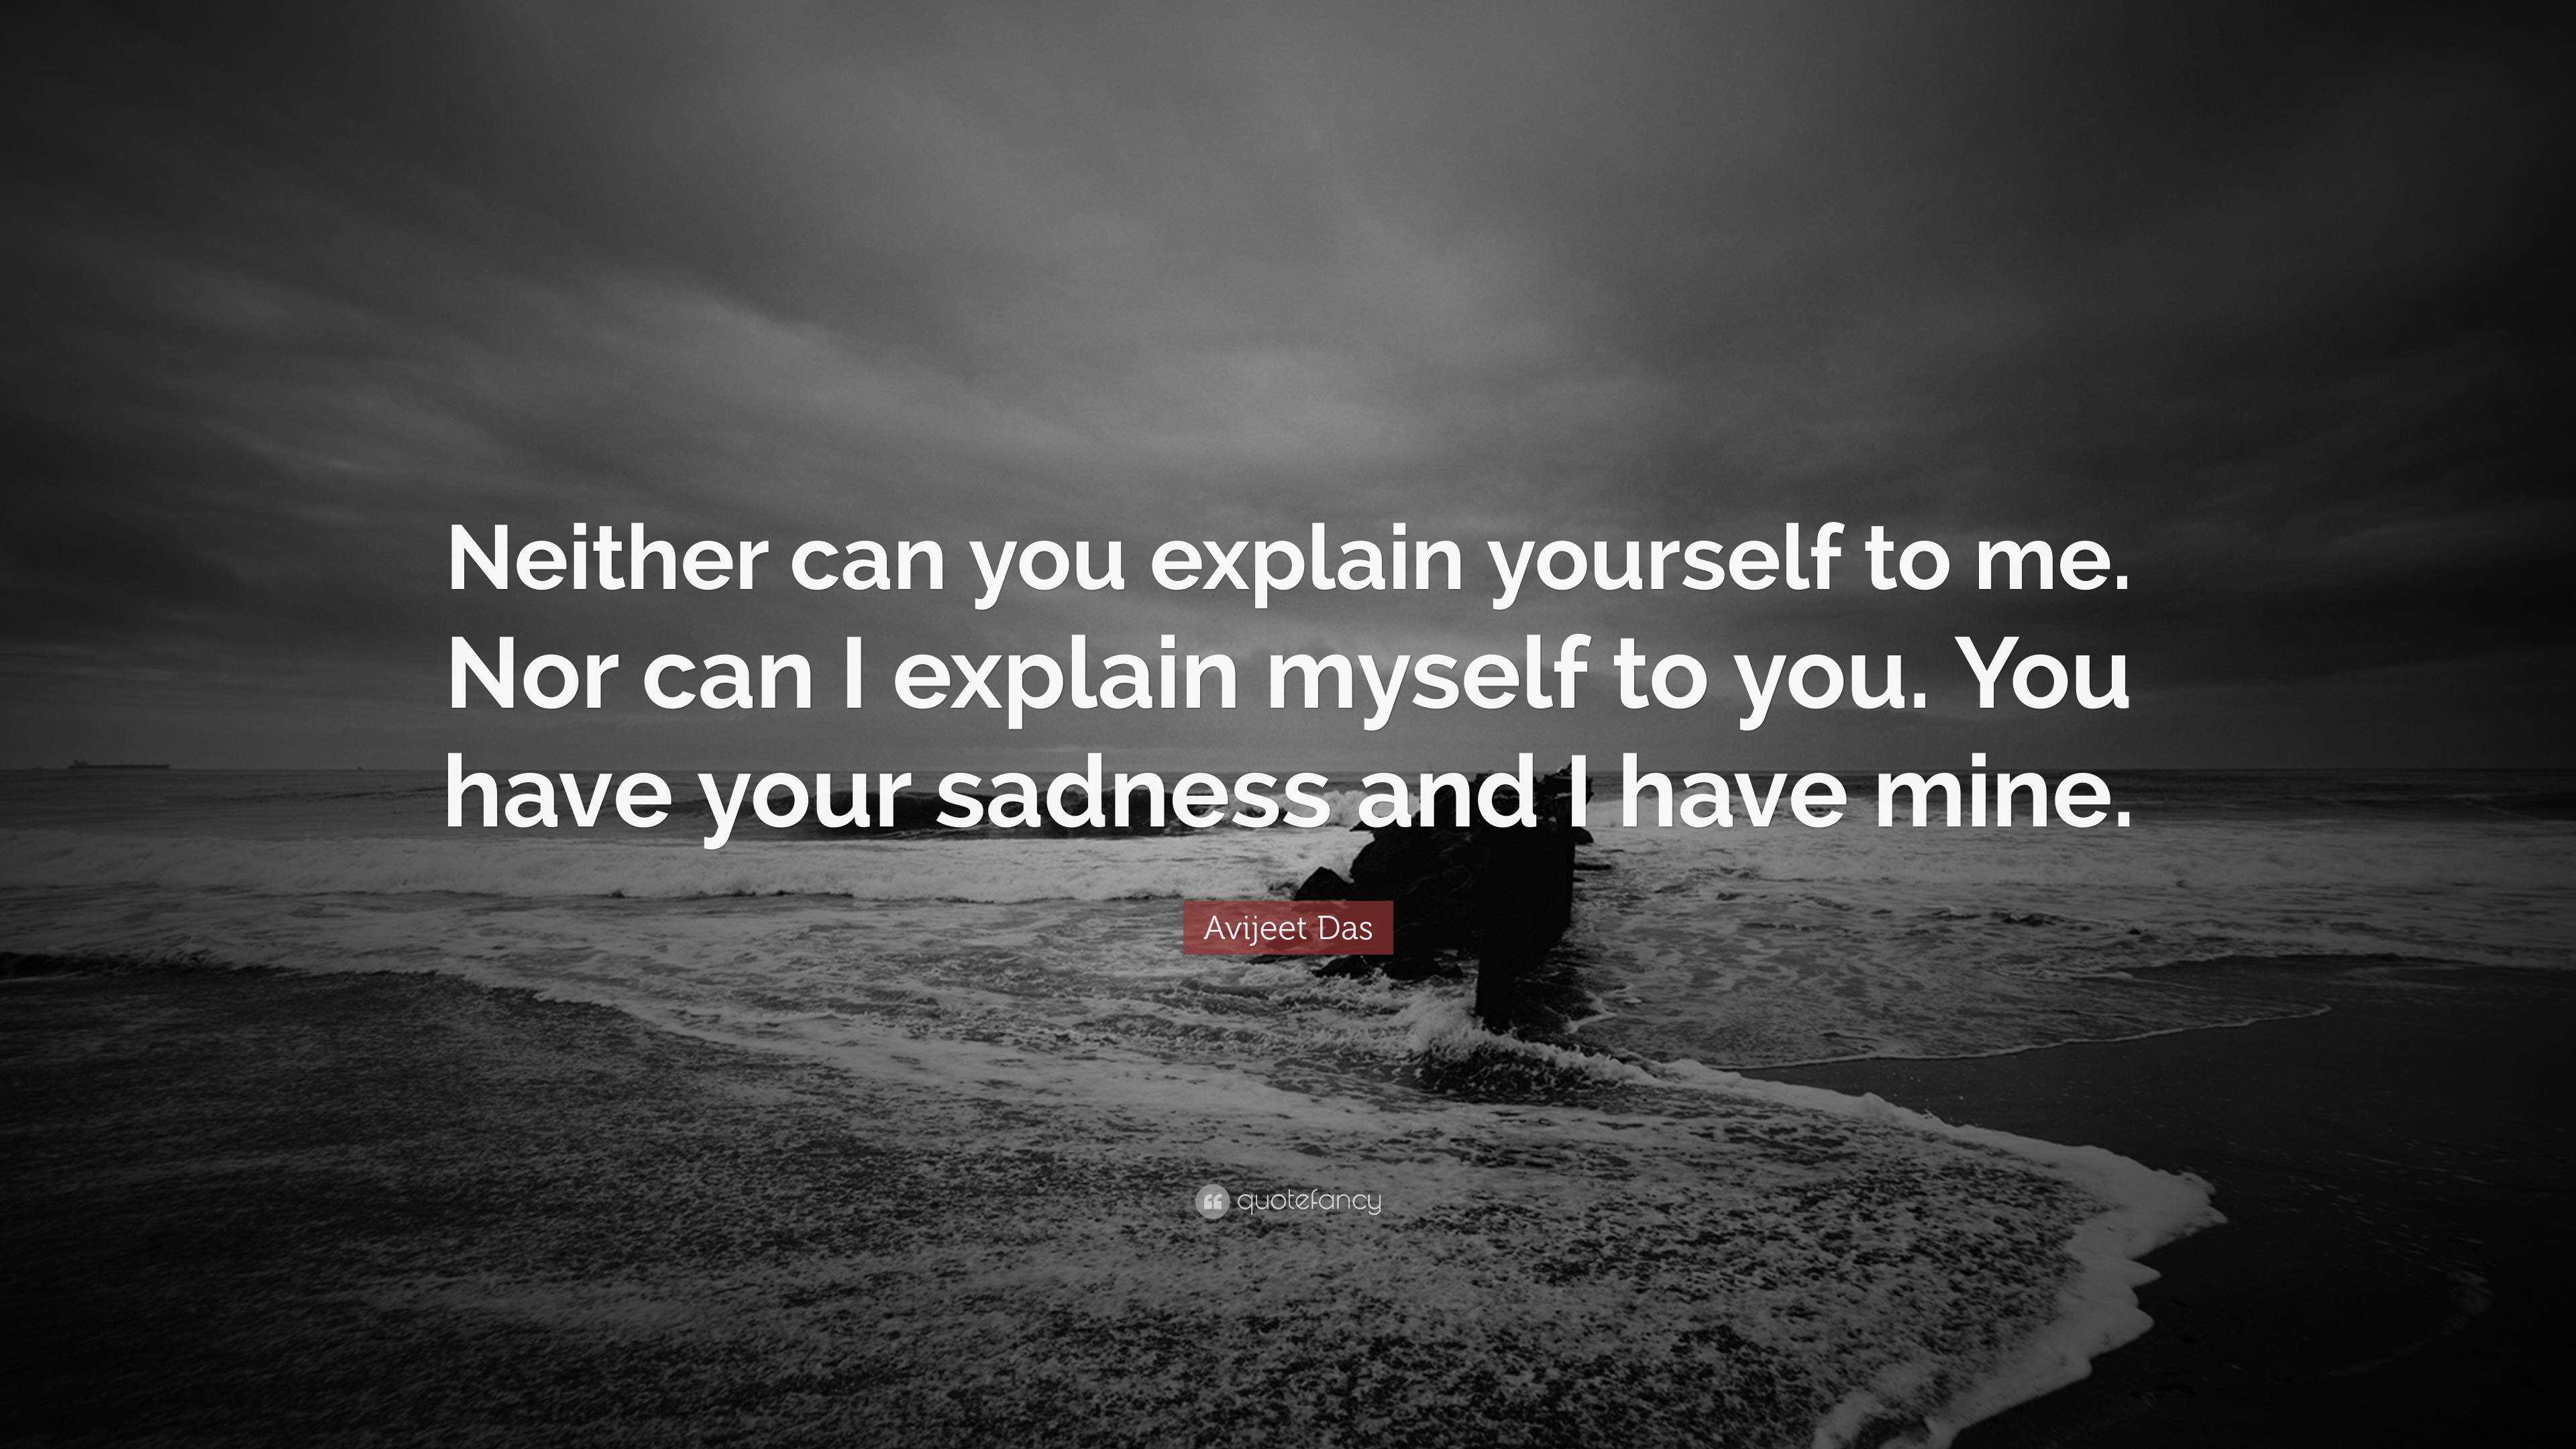 Avijeet Das Quote: “Neither can you explain yourself to me. Nor can I ...